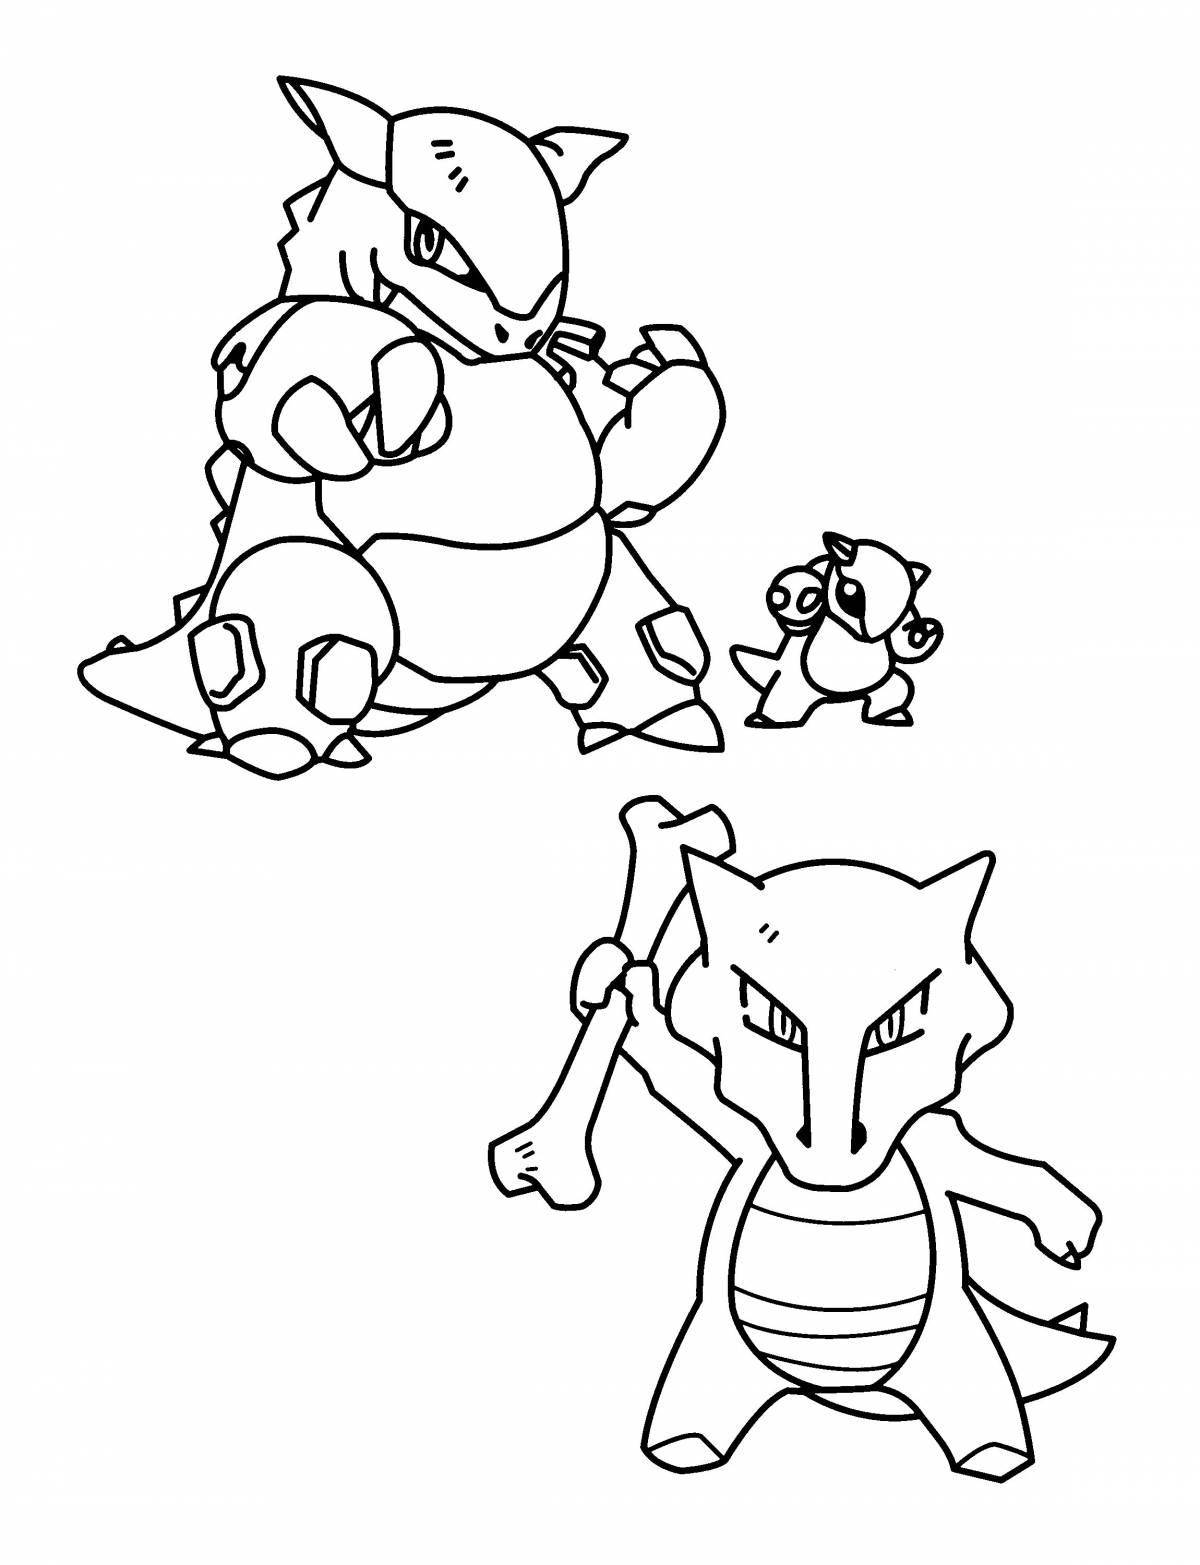 Intriguing pokemon coloring pages